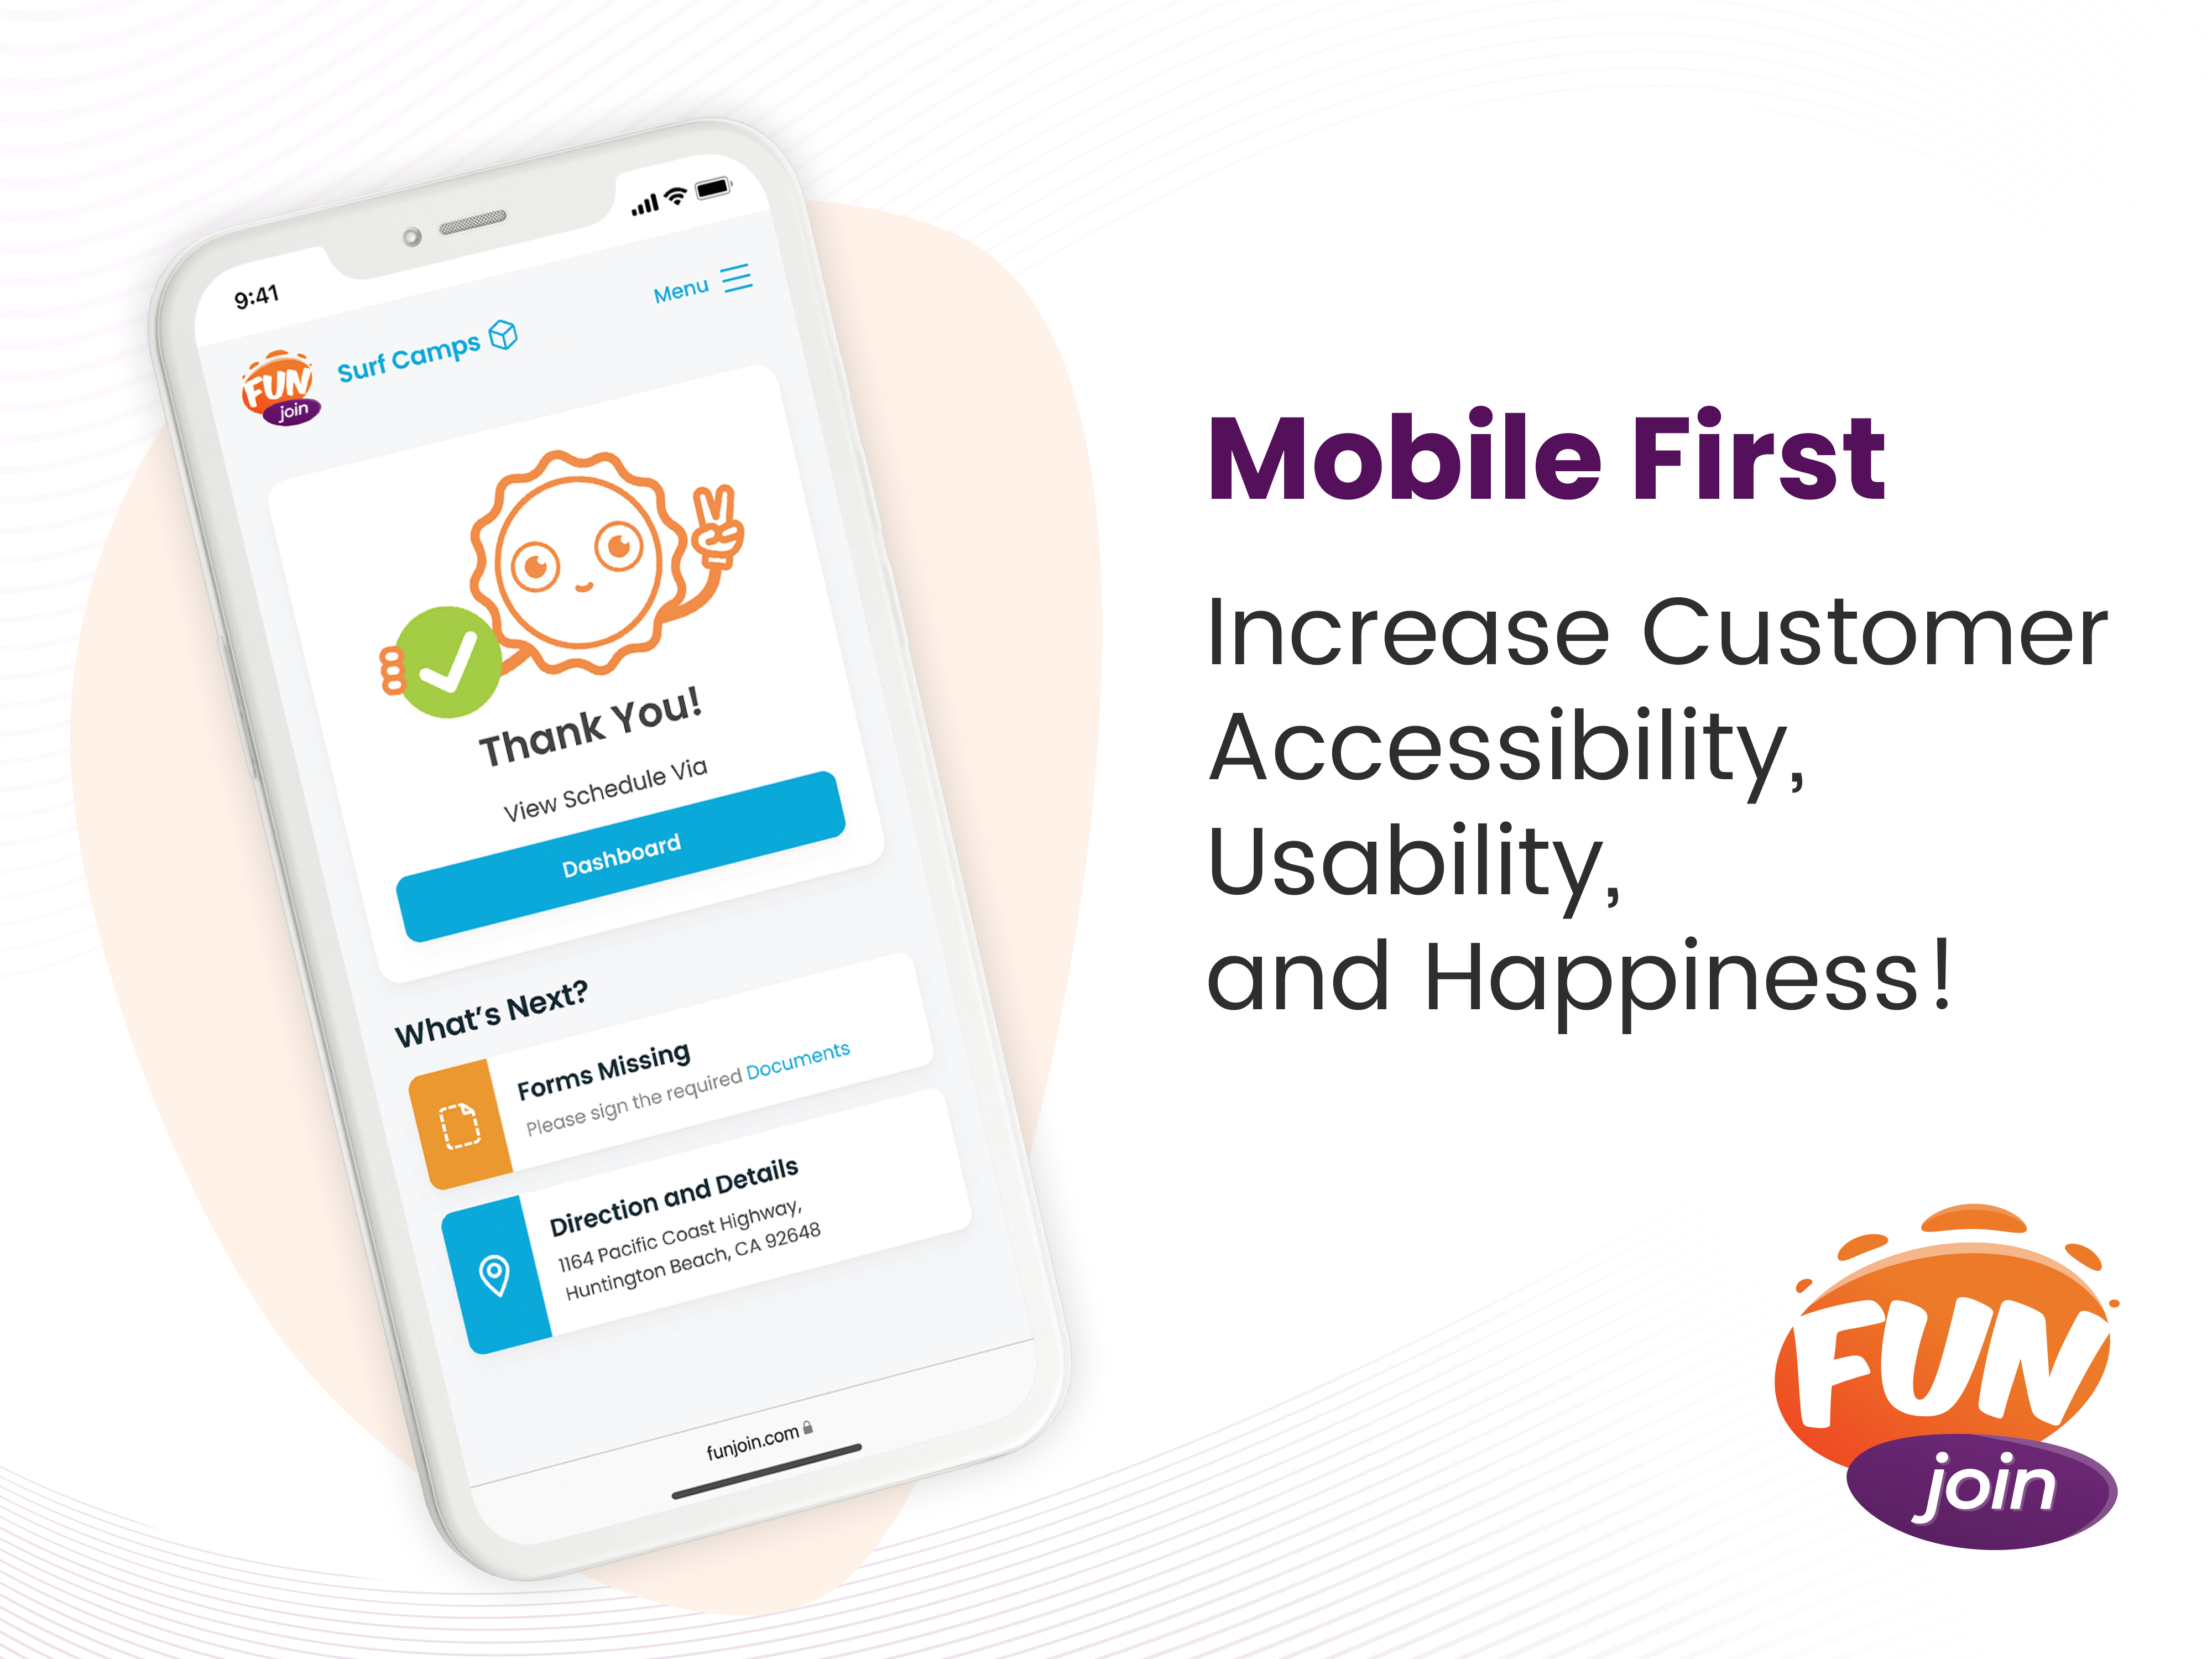 FunJoin's mobile-first approach enhances customer accessibility, usability, and satisfaction. By placing all necessary tools and information at your clients' fingertips, it fosters a seamless experience that satisfies the needs of today's tech-savvy user.